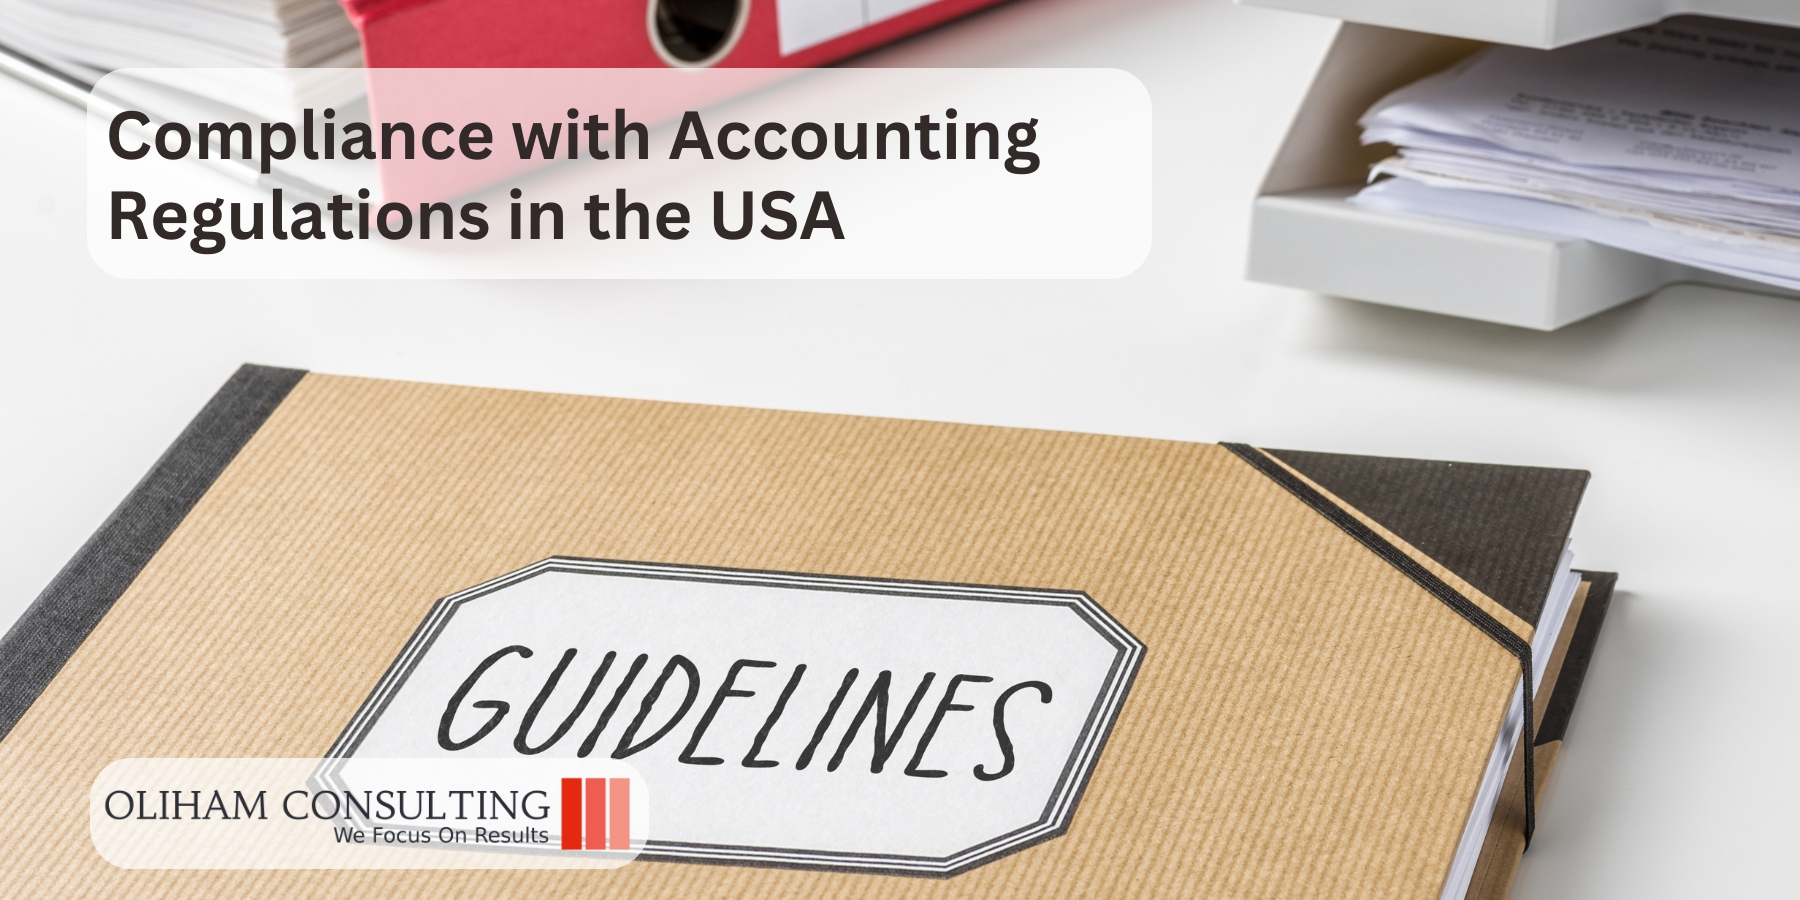 Ensuring Compliance with Accounting Regulations in the USA